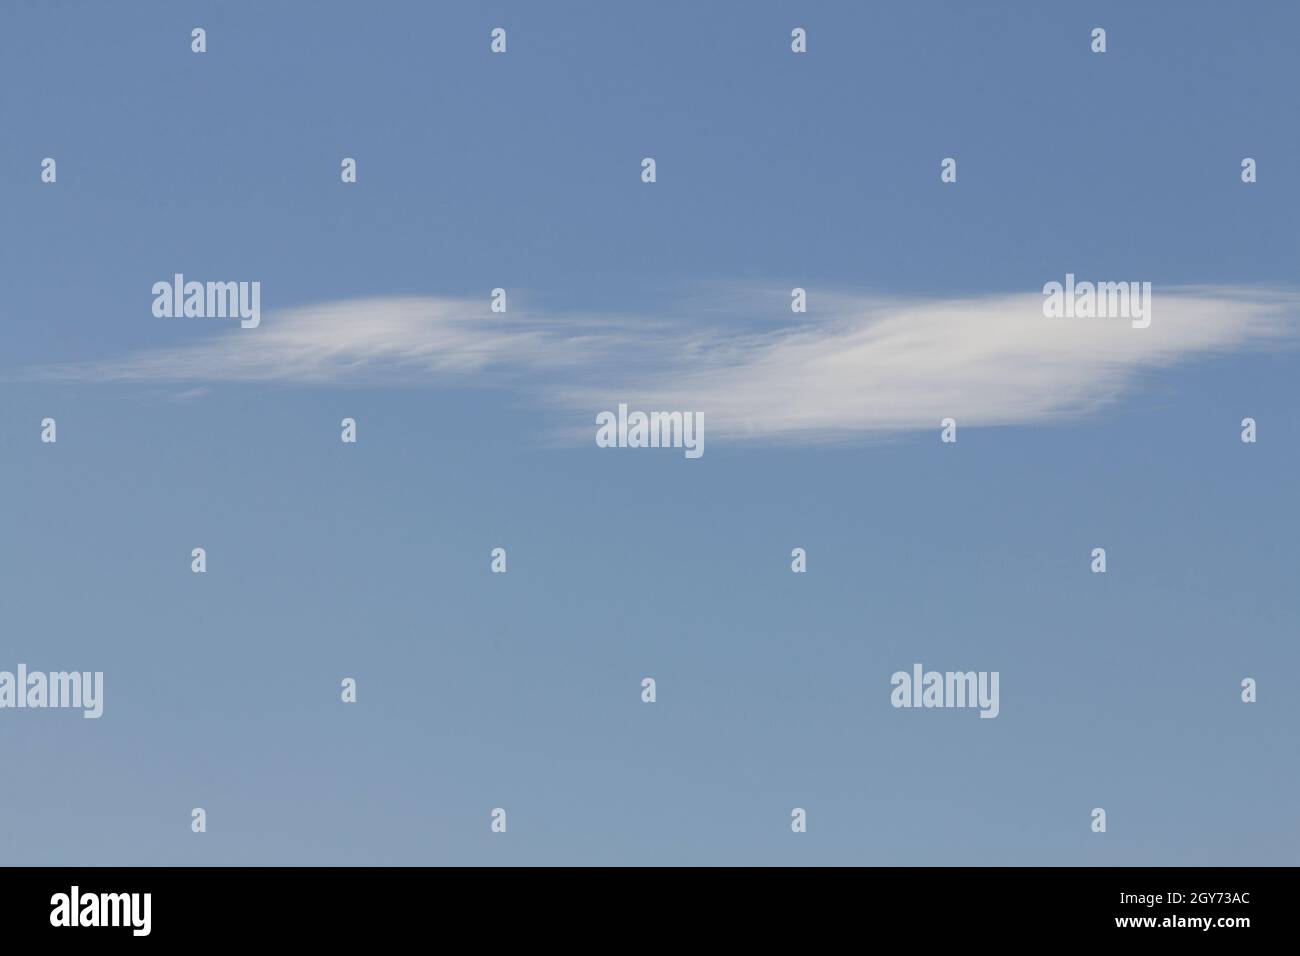 Blue sky with cloud for background or composite images august UK 2021 white grey cloud on plain blue sky landscape format Stock Photo